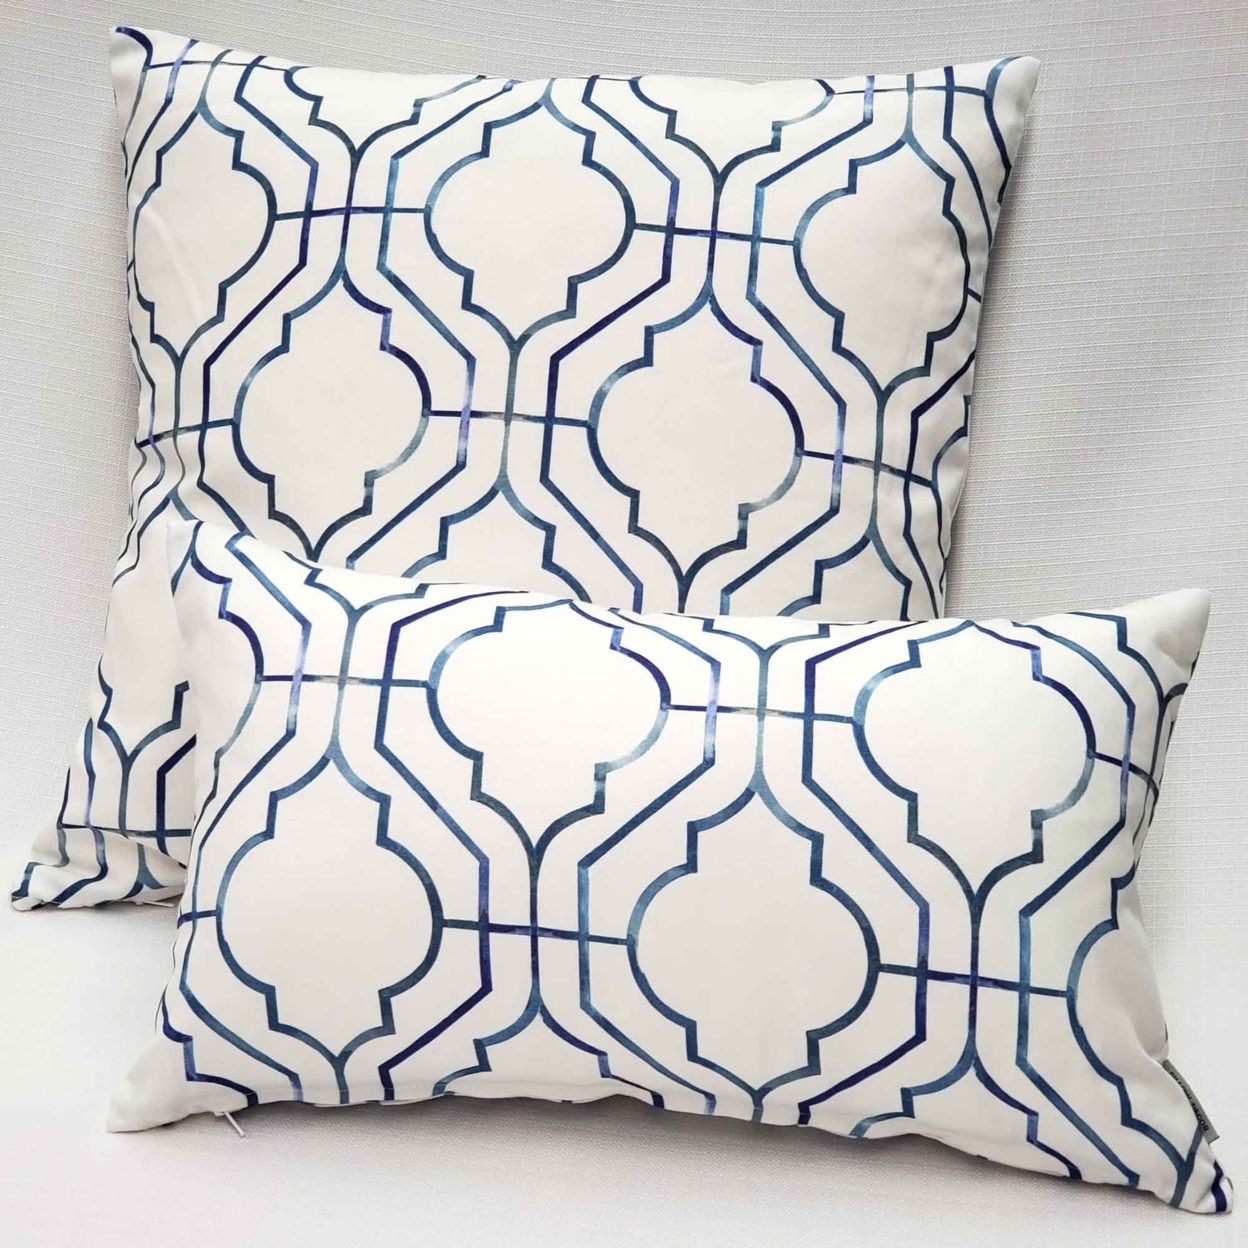 Biltmore Gate Blue Throw Pillow 20x20 Inches Square, Complete Pillow With Polyfill Pillow Insert